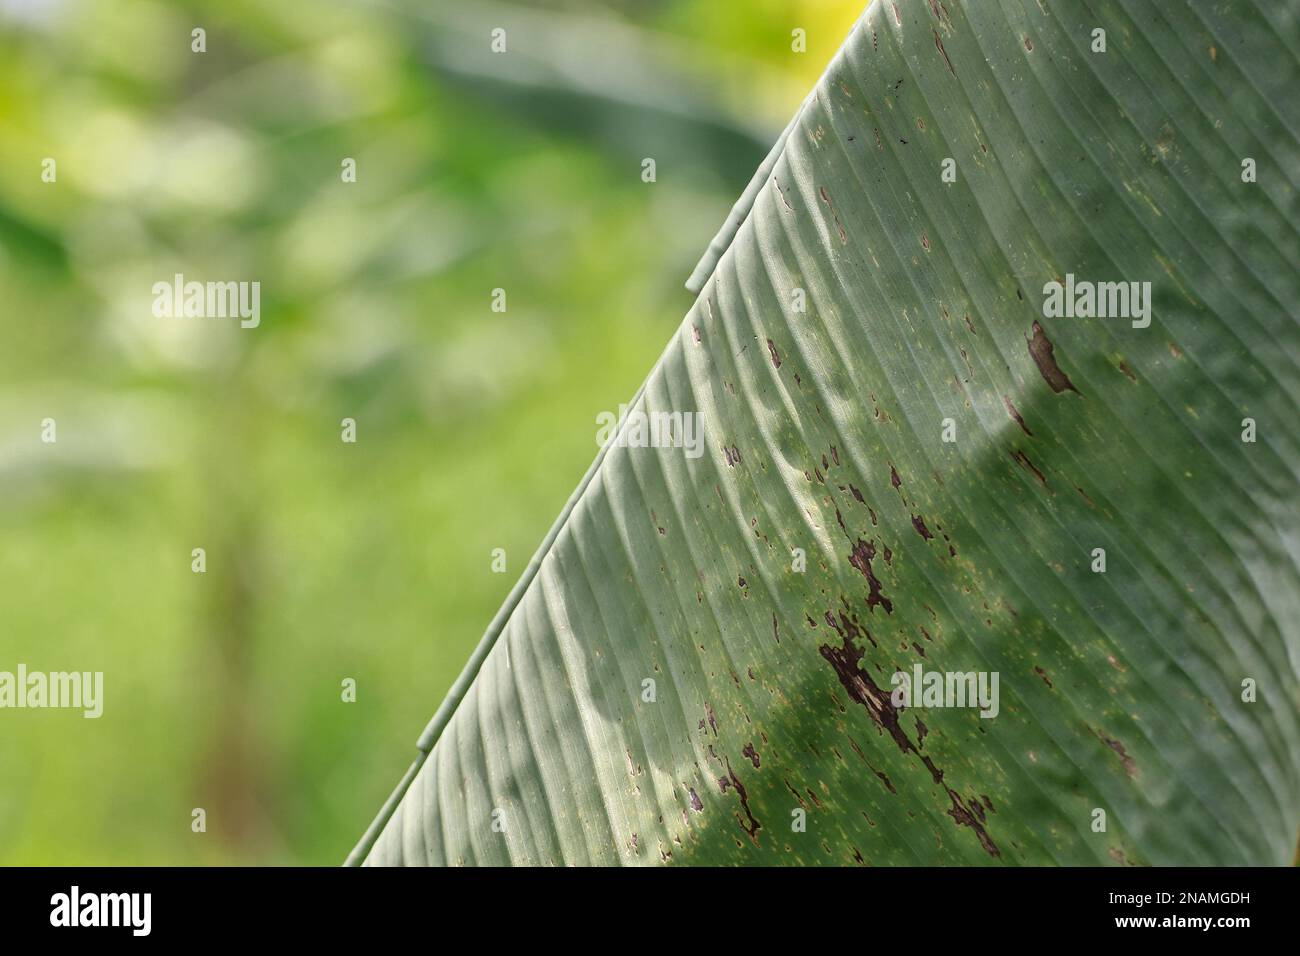 Banana leaves are damaged by insects. The background is blurred in bright green. Stock Photo